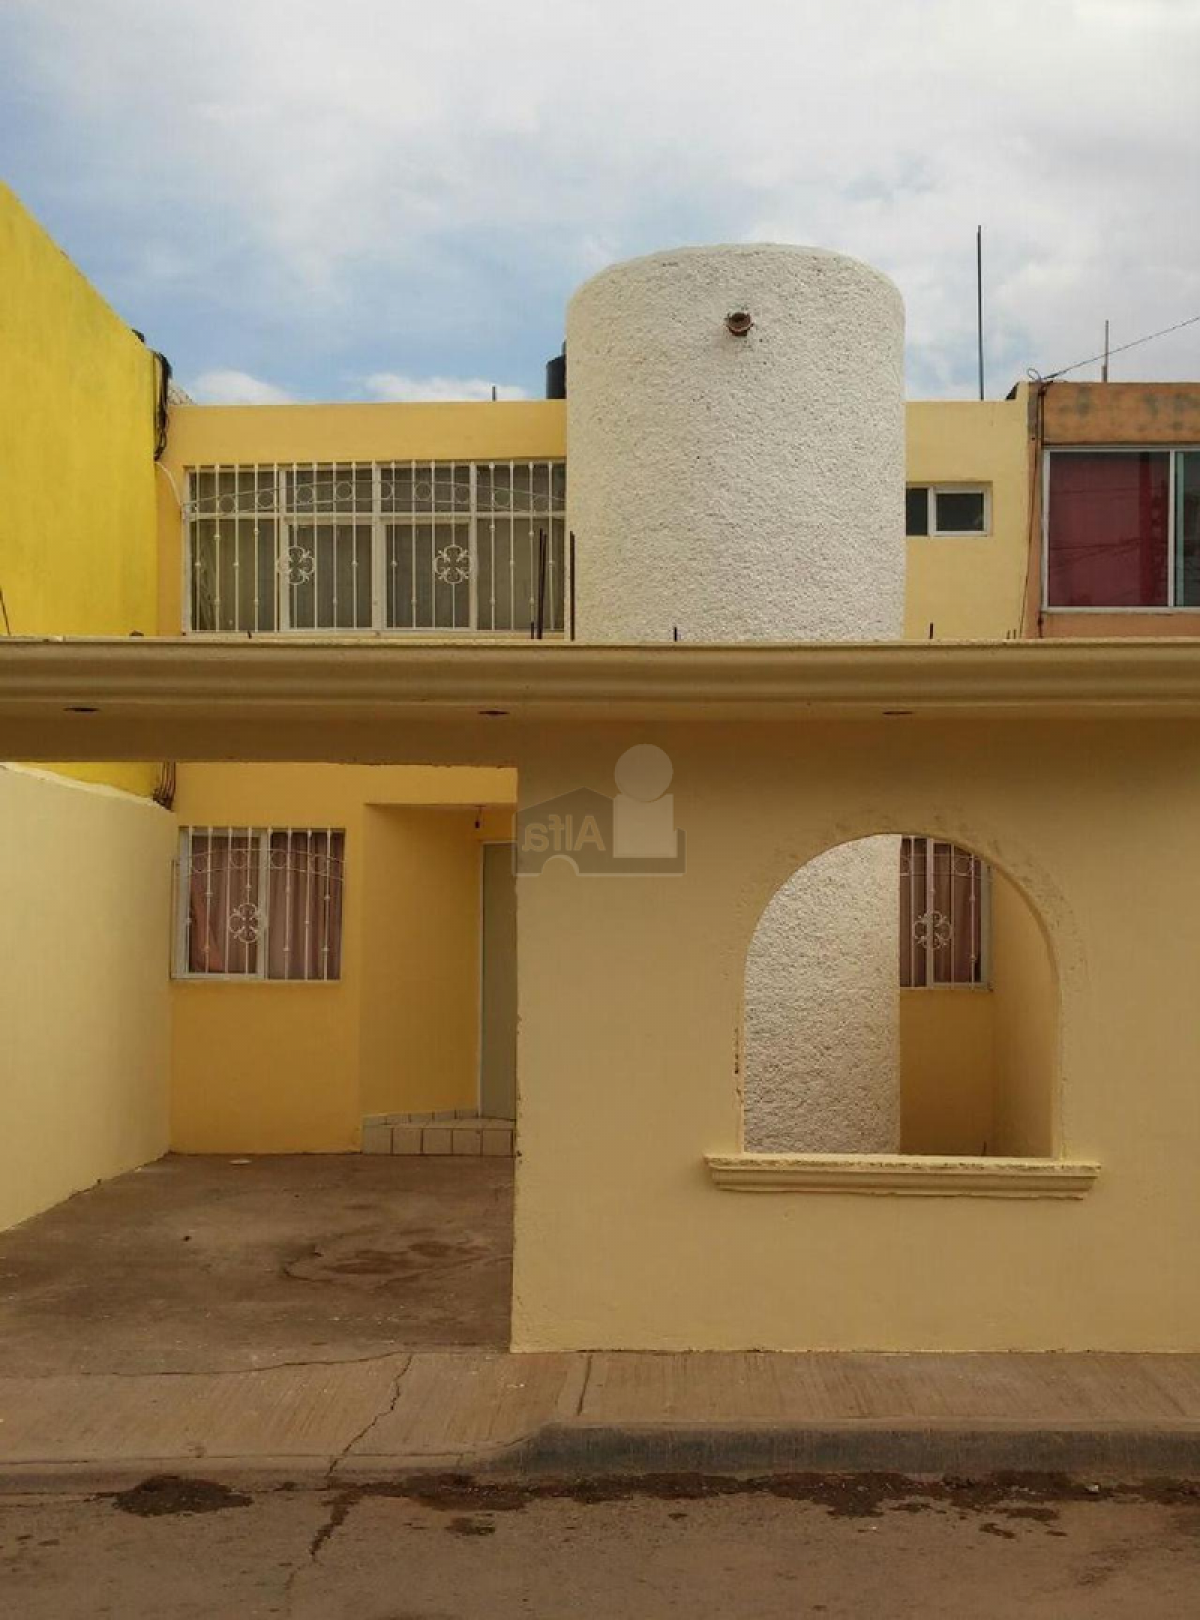 Picture of Home For Sale in Zacatecas, Zacatecas, Mexico